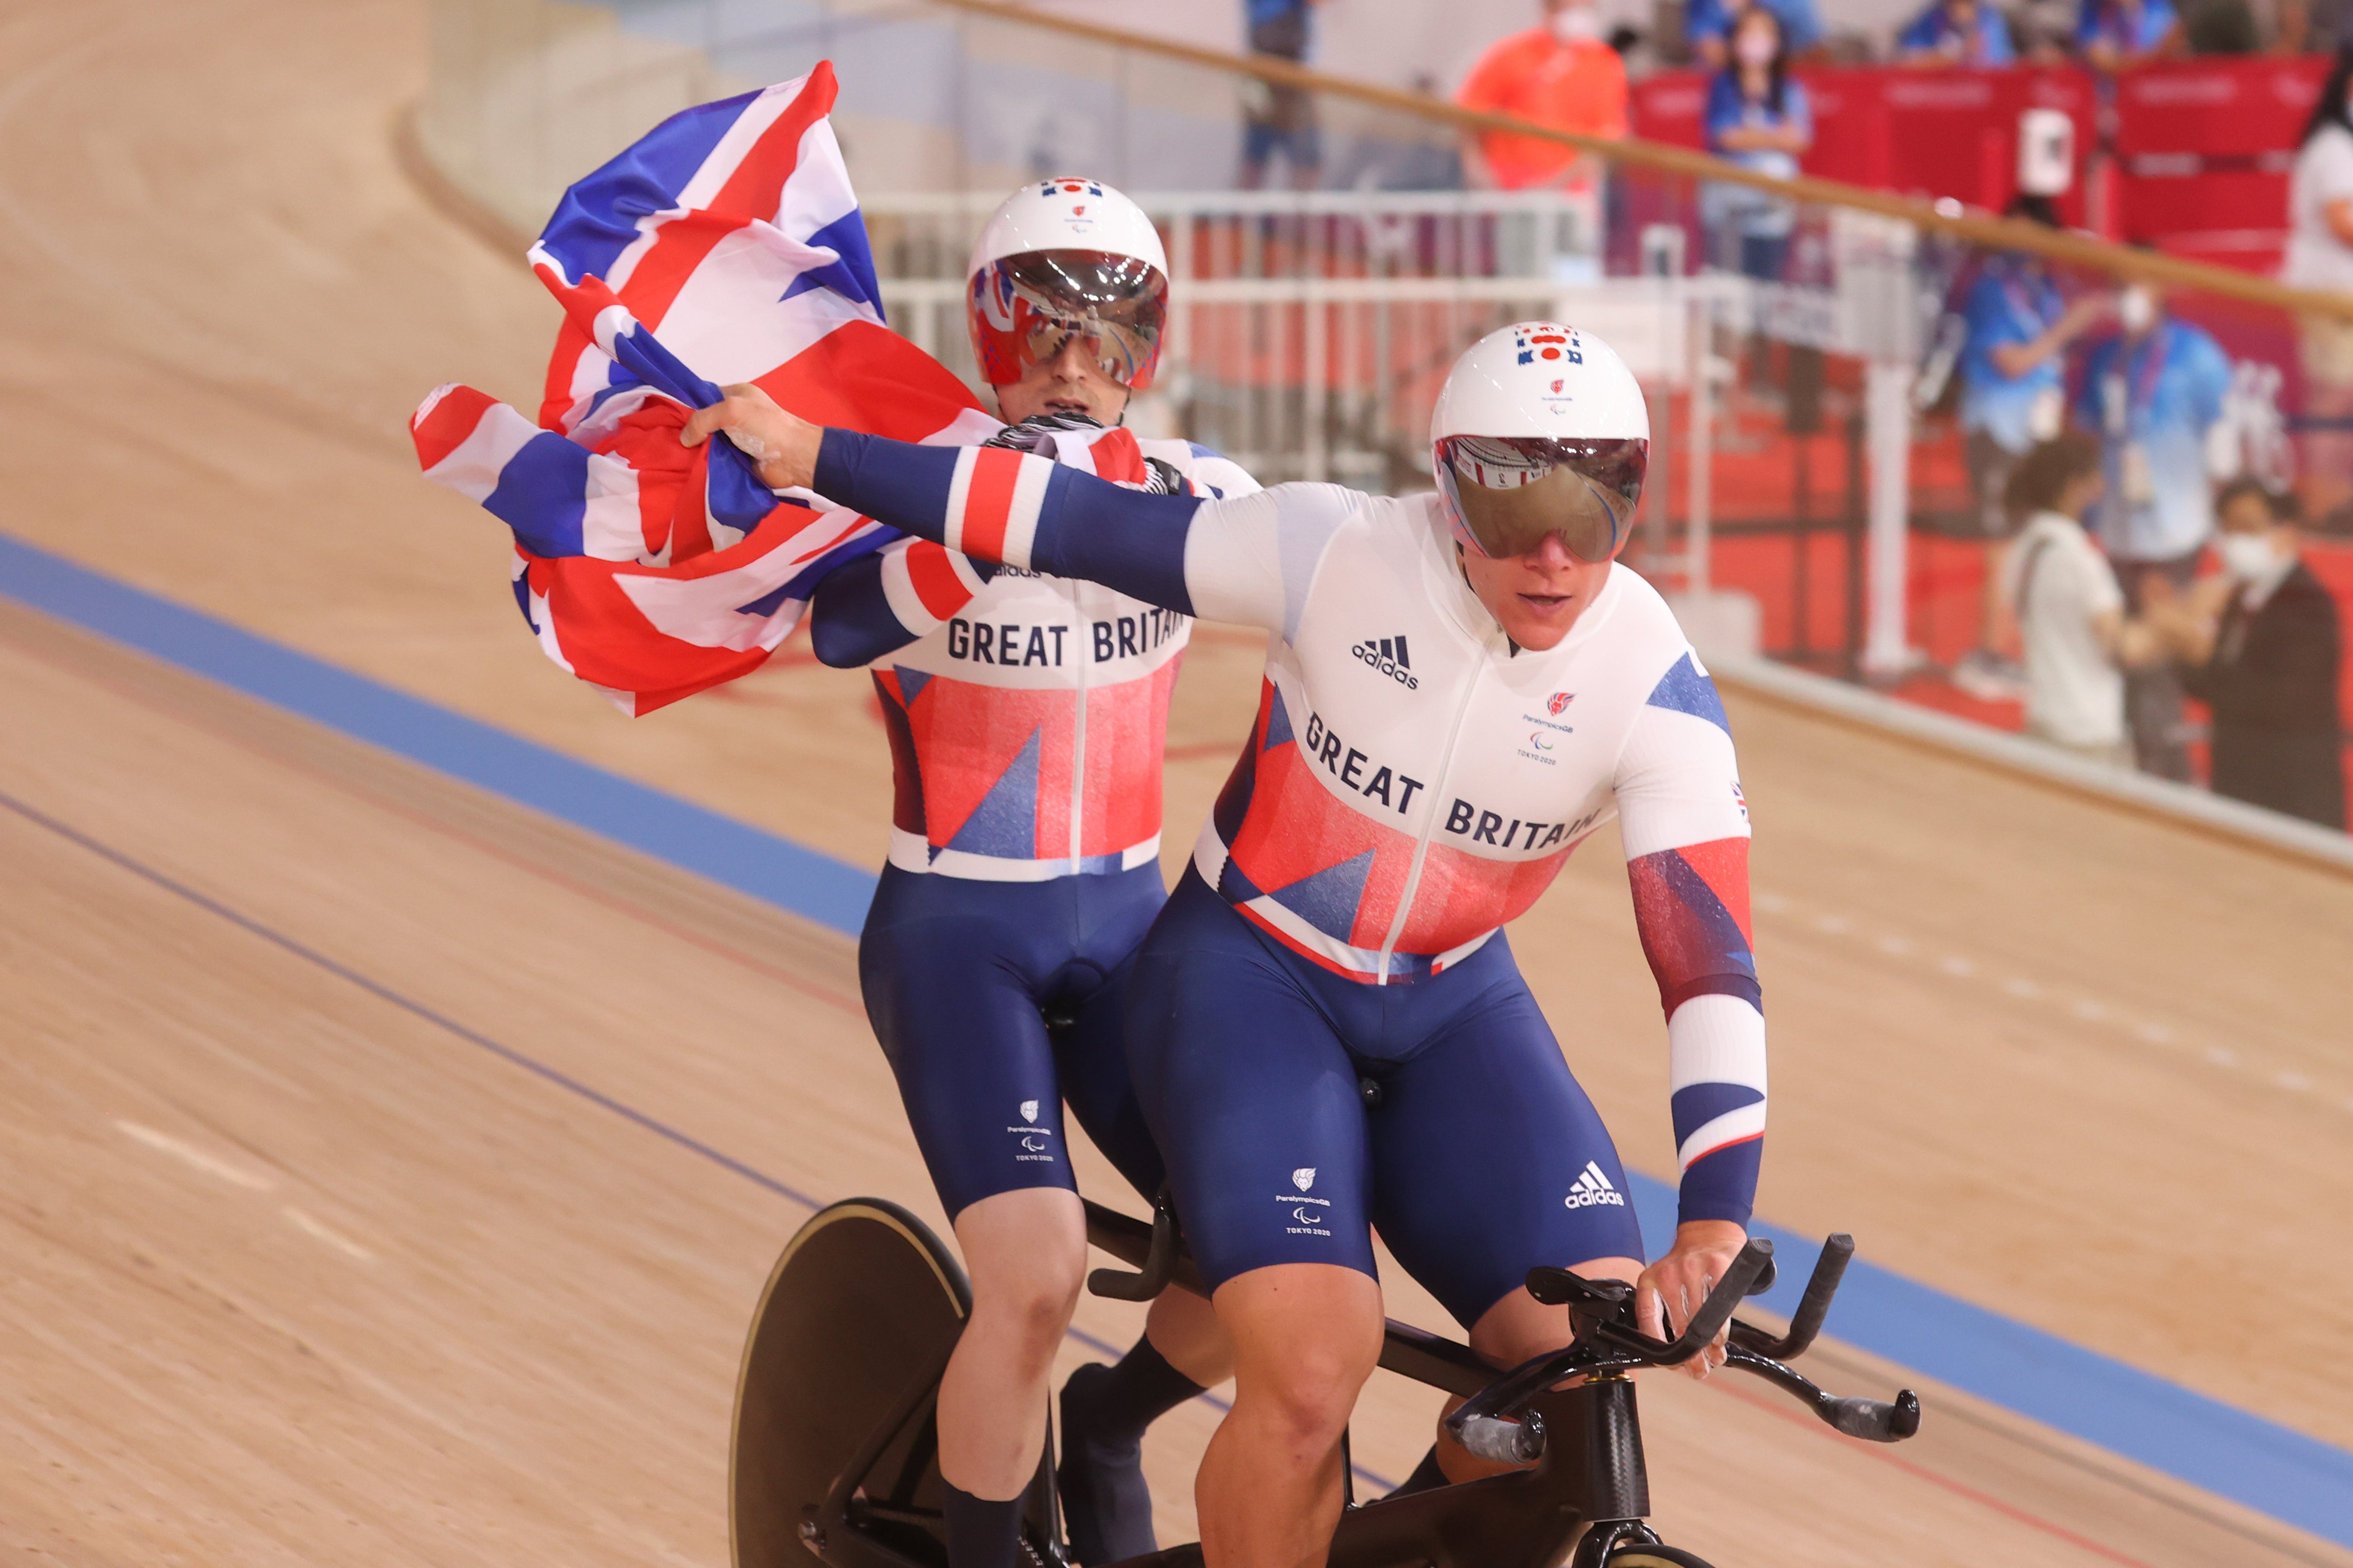 Neil Fachie and pilot Matt Rotherham after winning men’s B 1000m time trial gold (PA Wire via DPA)